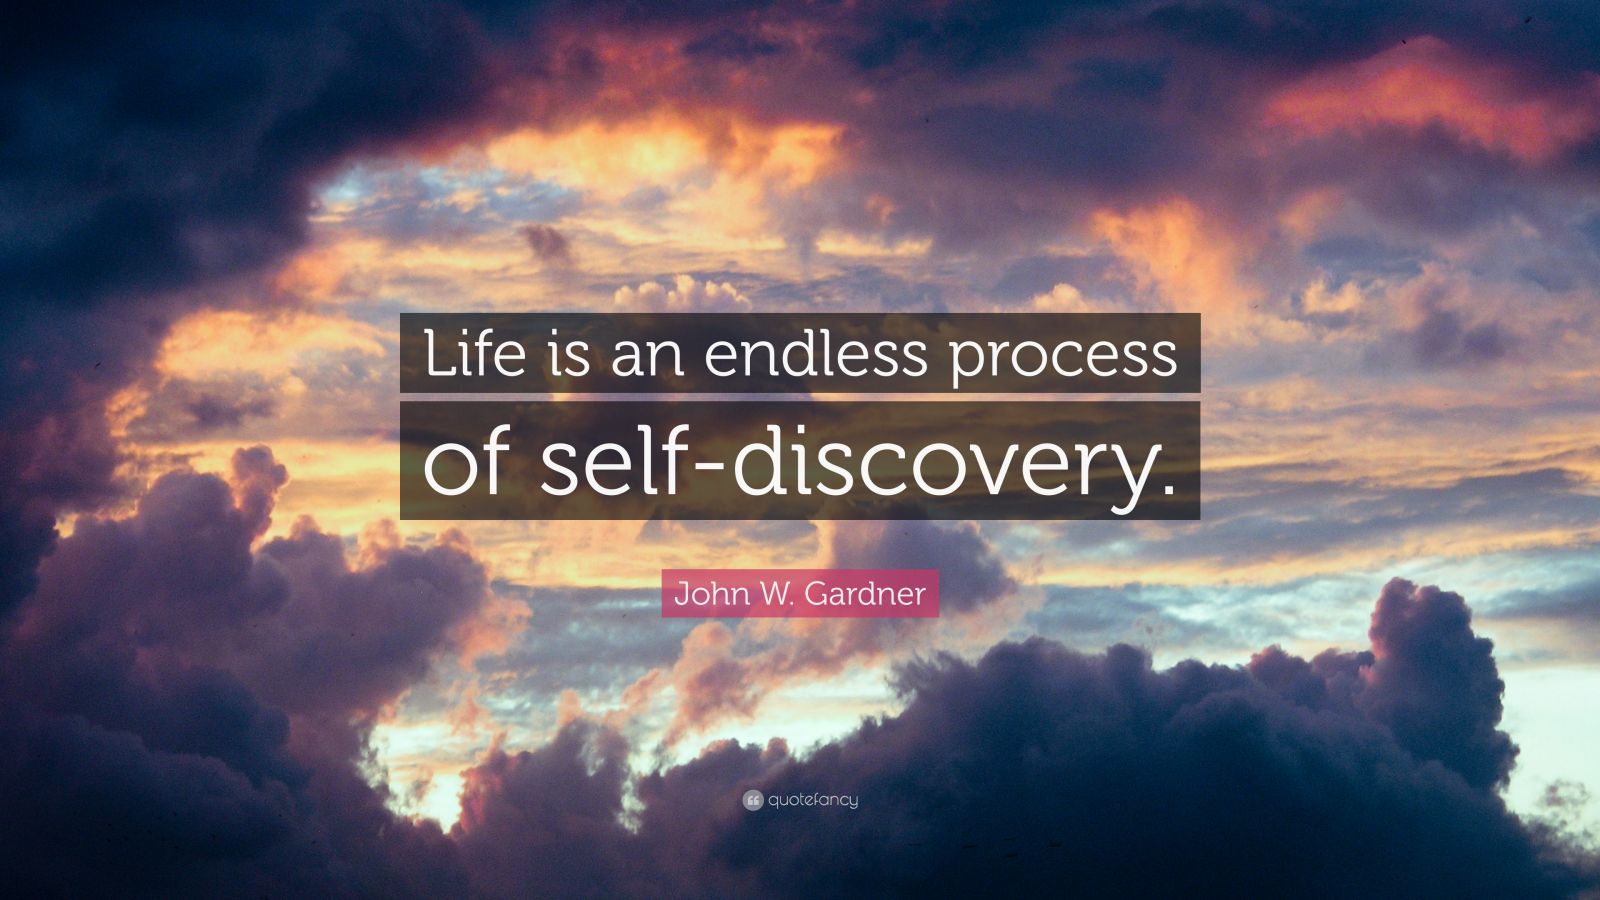 John W. Gardner Quote: "Life is an endless process of self-discovery." (9 wallpapers) - Quotefancy